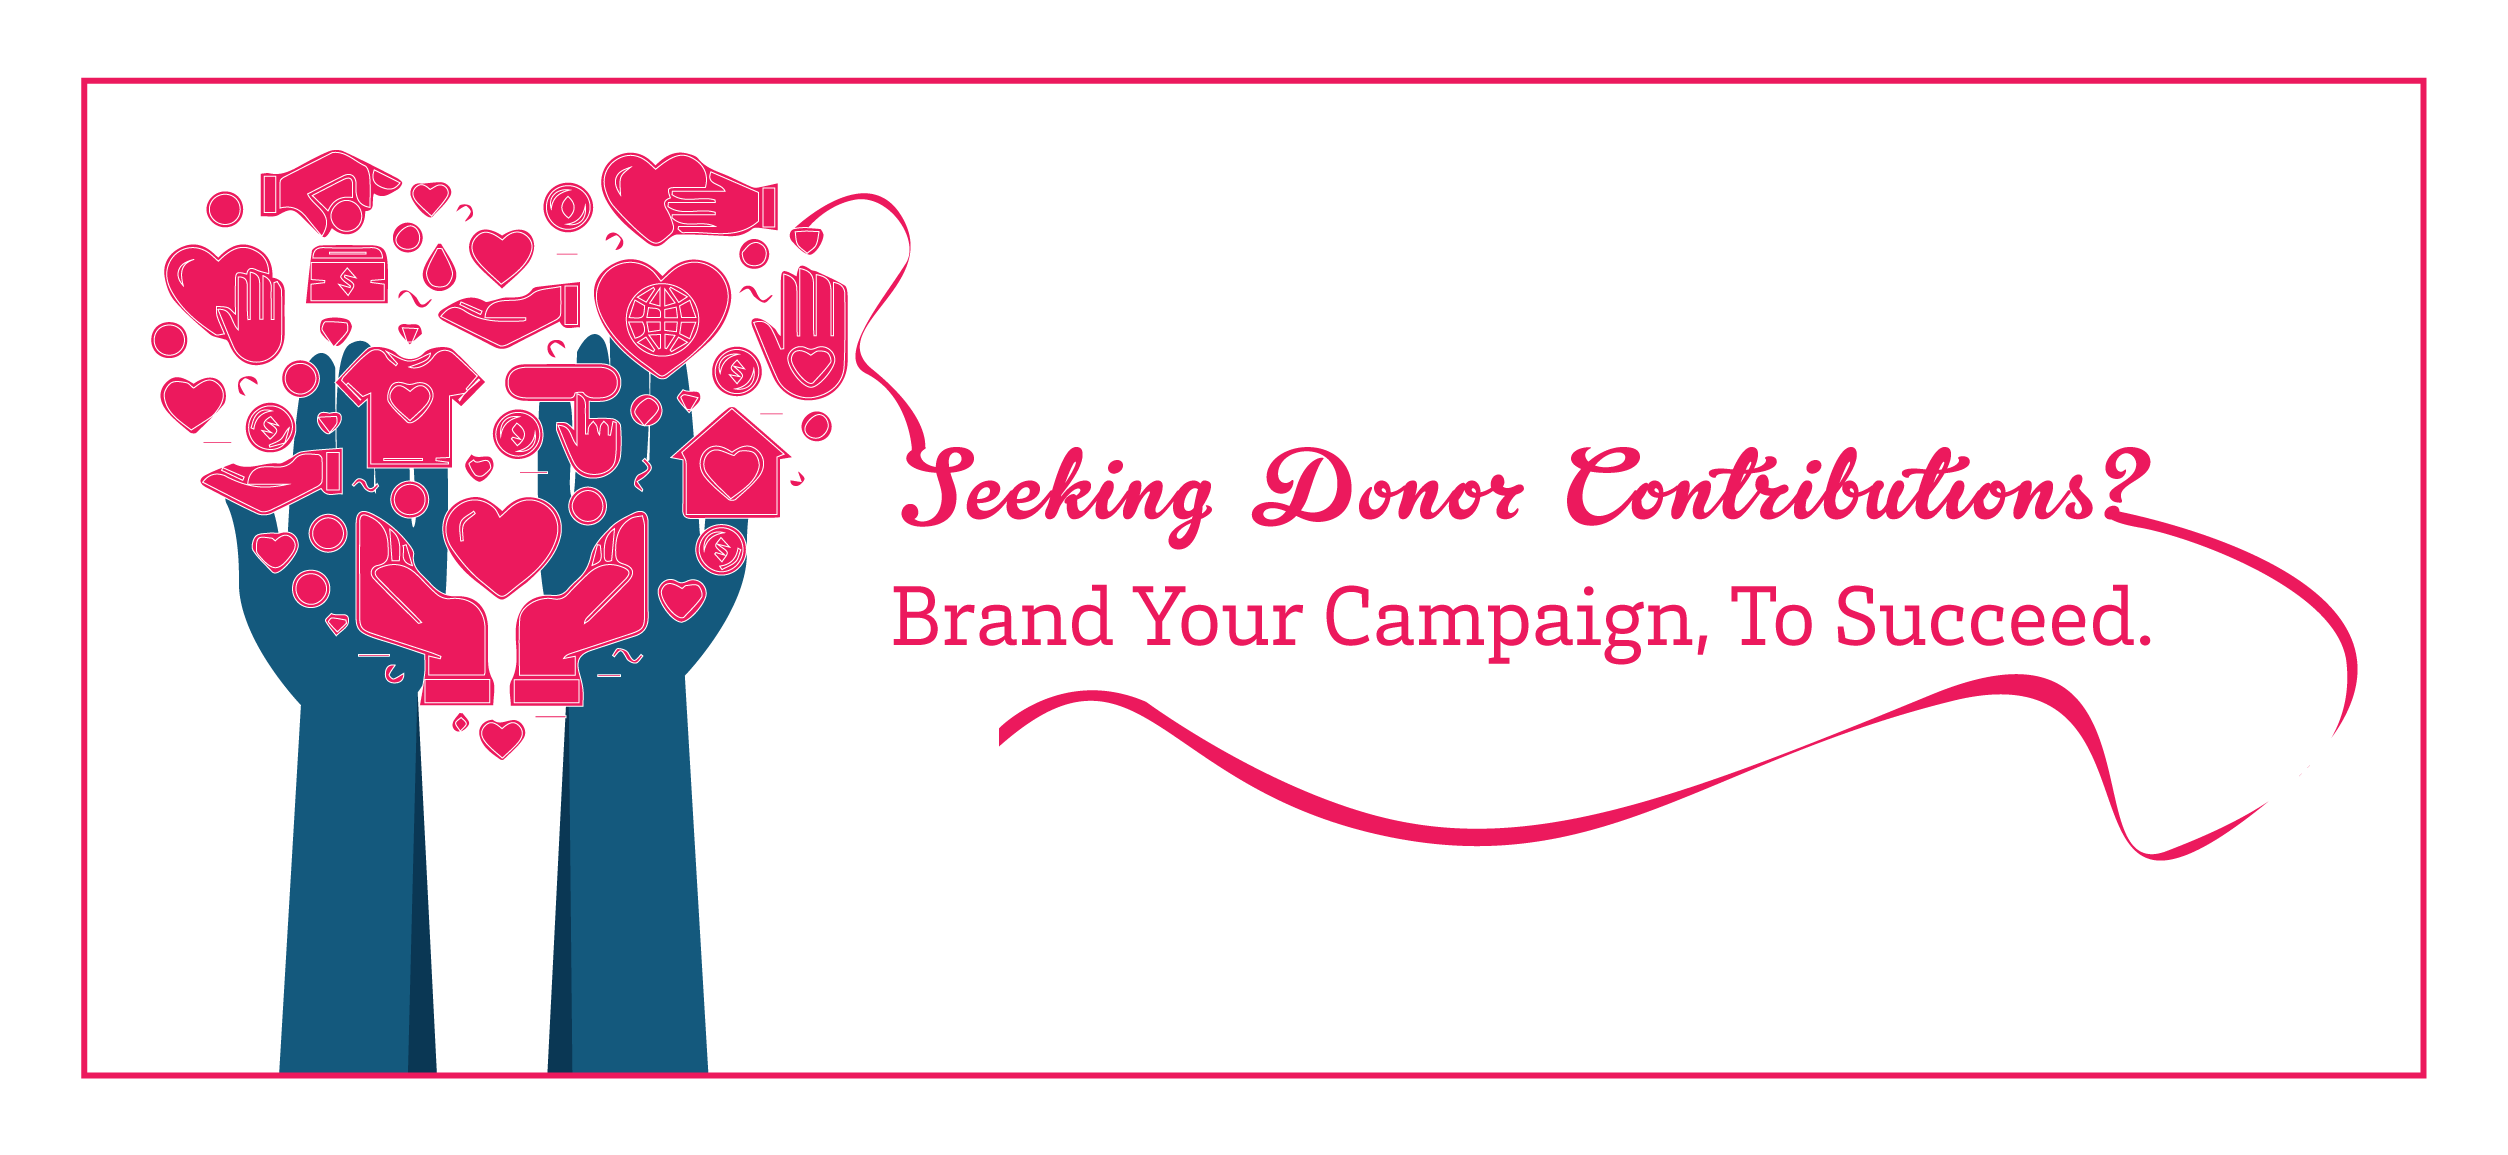 Seeking Donor Contributions? Brand Your Campaign, to Succeed.